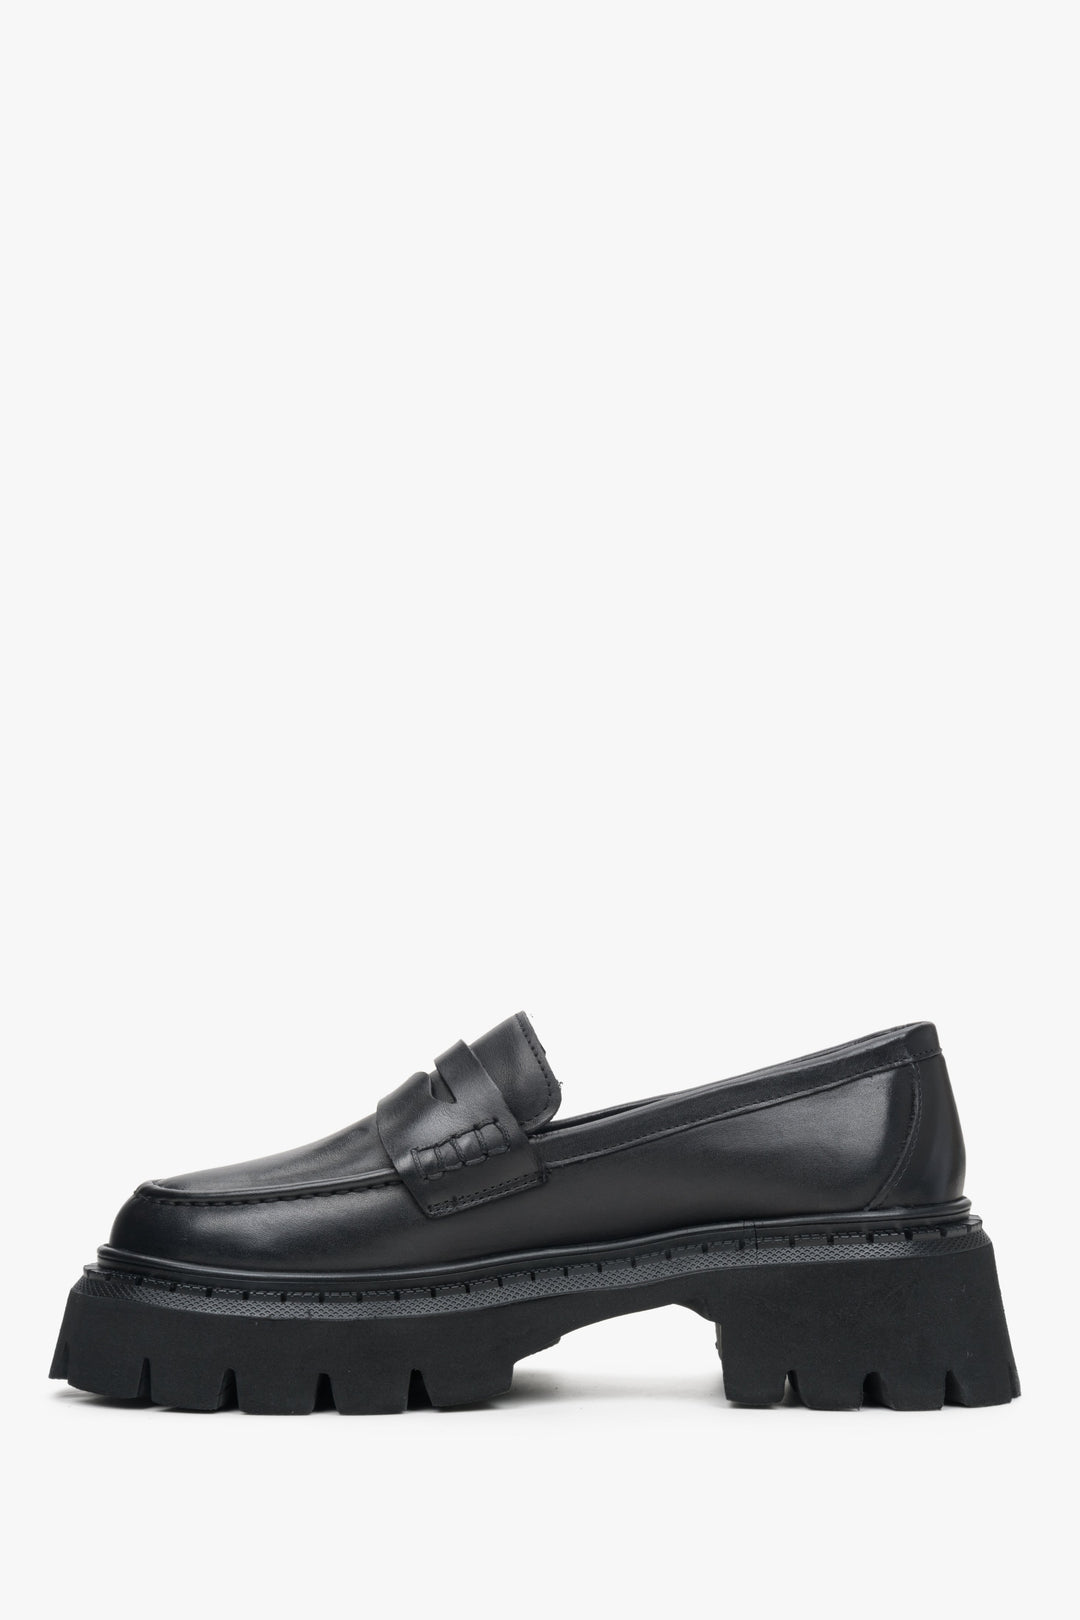 Women's black loafers with a wide black sole - profile.